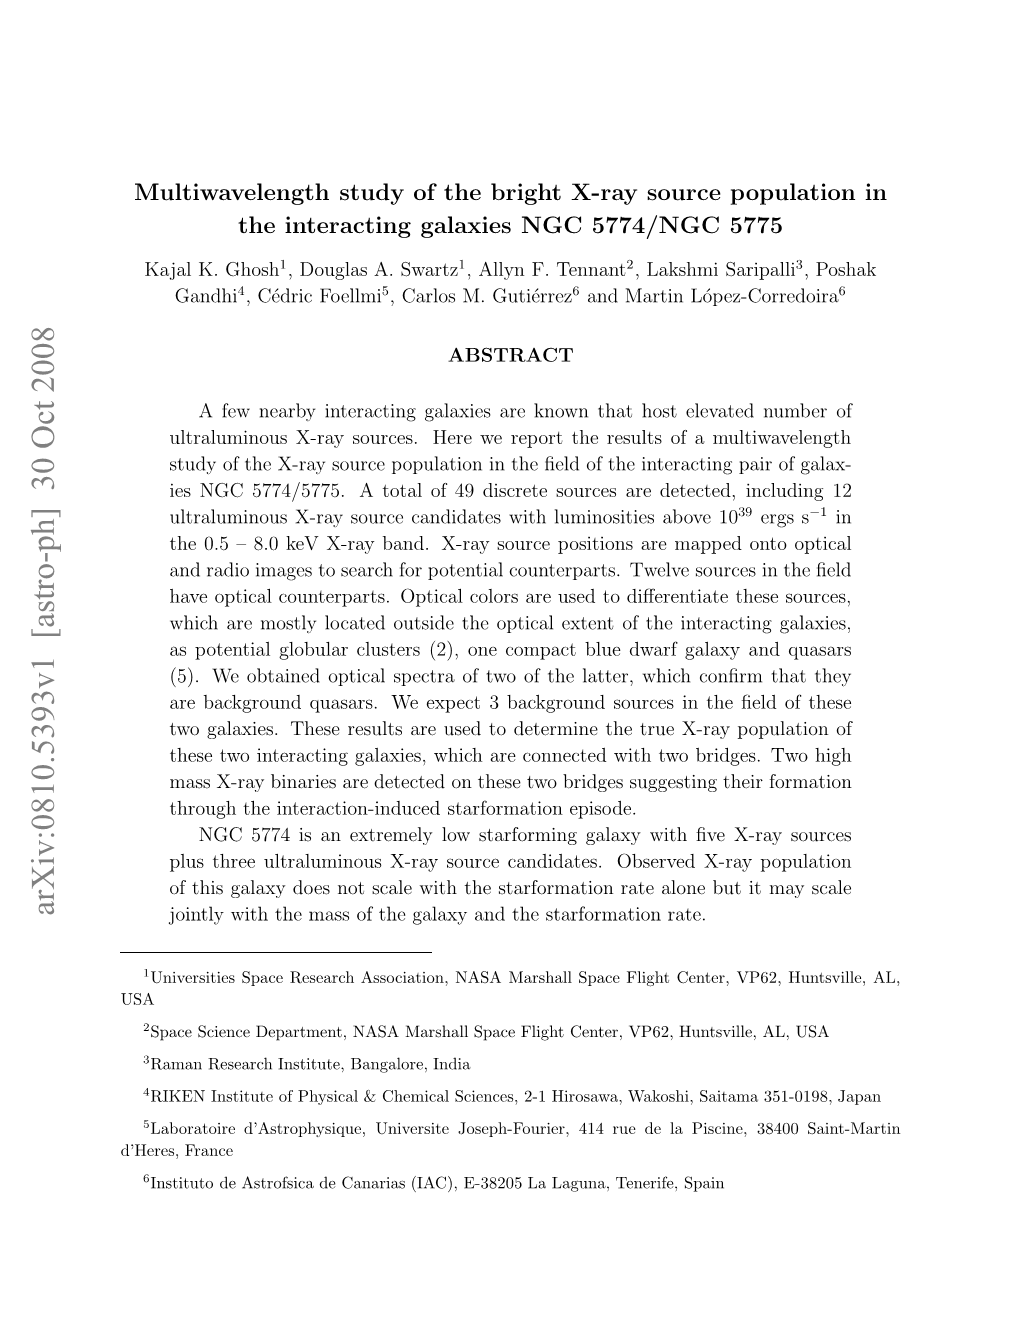 Multiwavelength Study of the Bright X-Ray Source Population in The